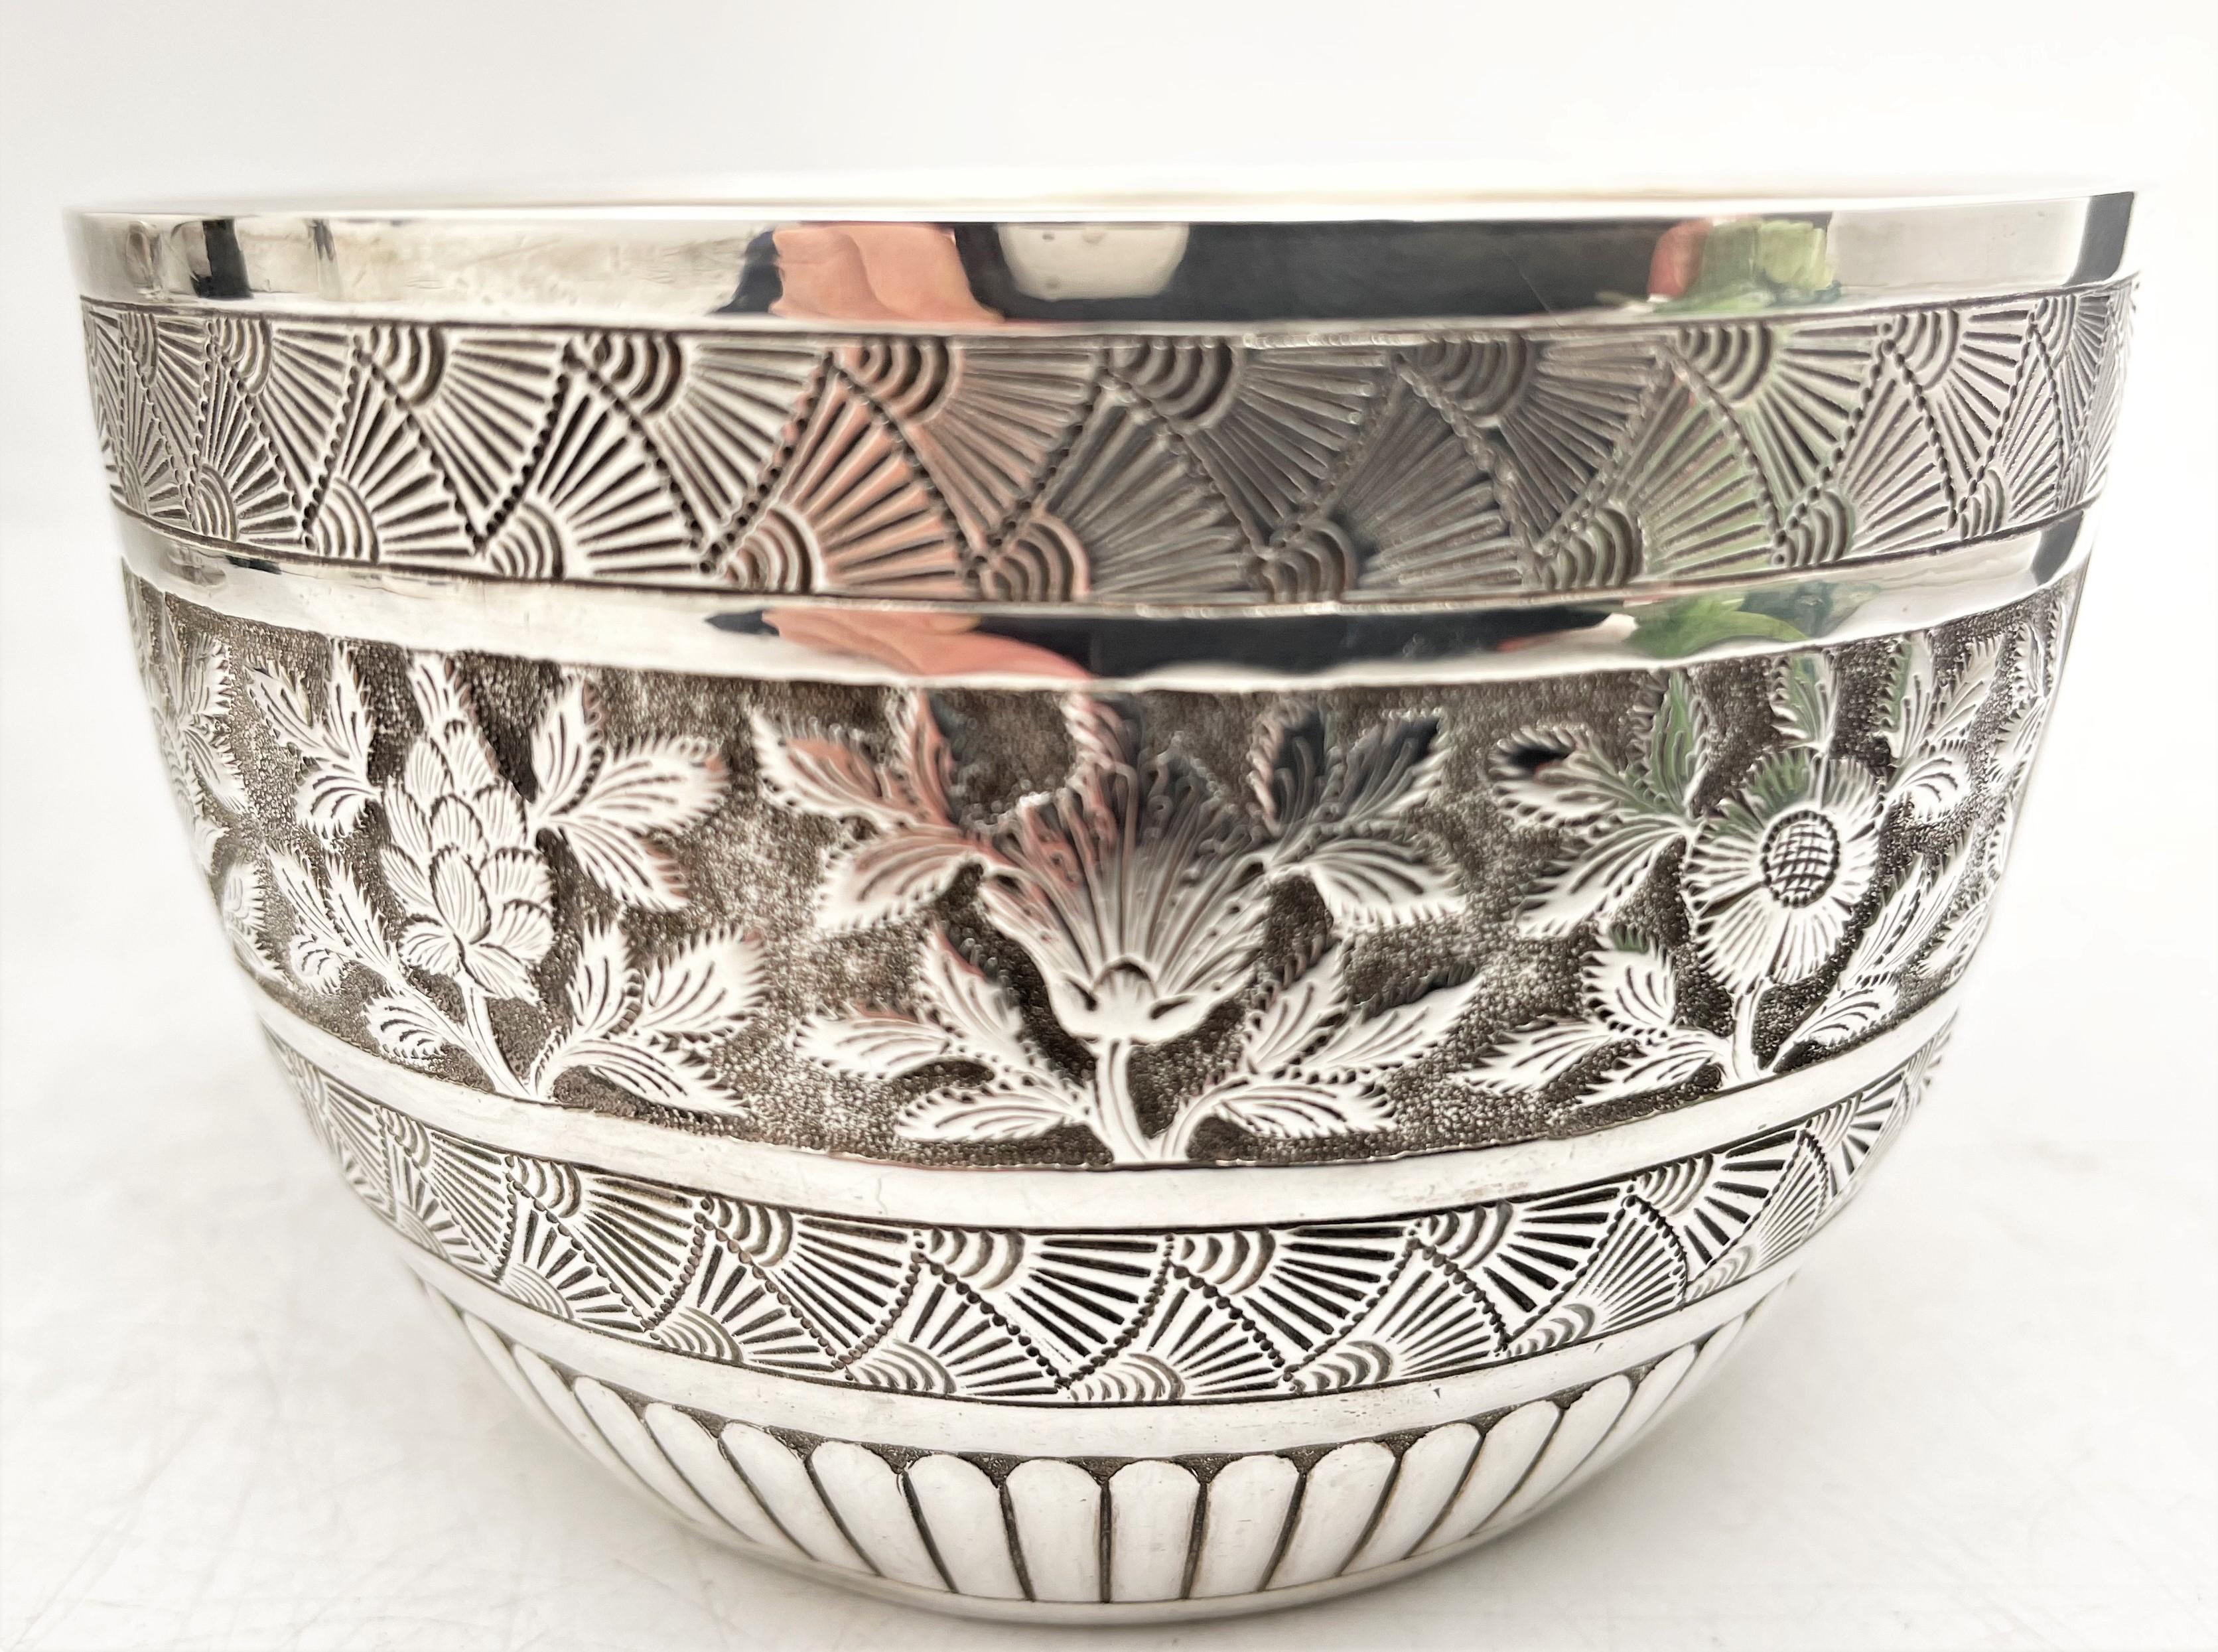 William Evans sterling silver bowl from 1881 (Victorian era), with ornate floral and geometric motifs adorning the exterior in a frieze-like design. It measures 4 1 /4'' in diameter by 2 7/8'' in height, weighs 5 troy ounces, and bears hallmarks as